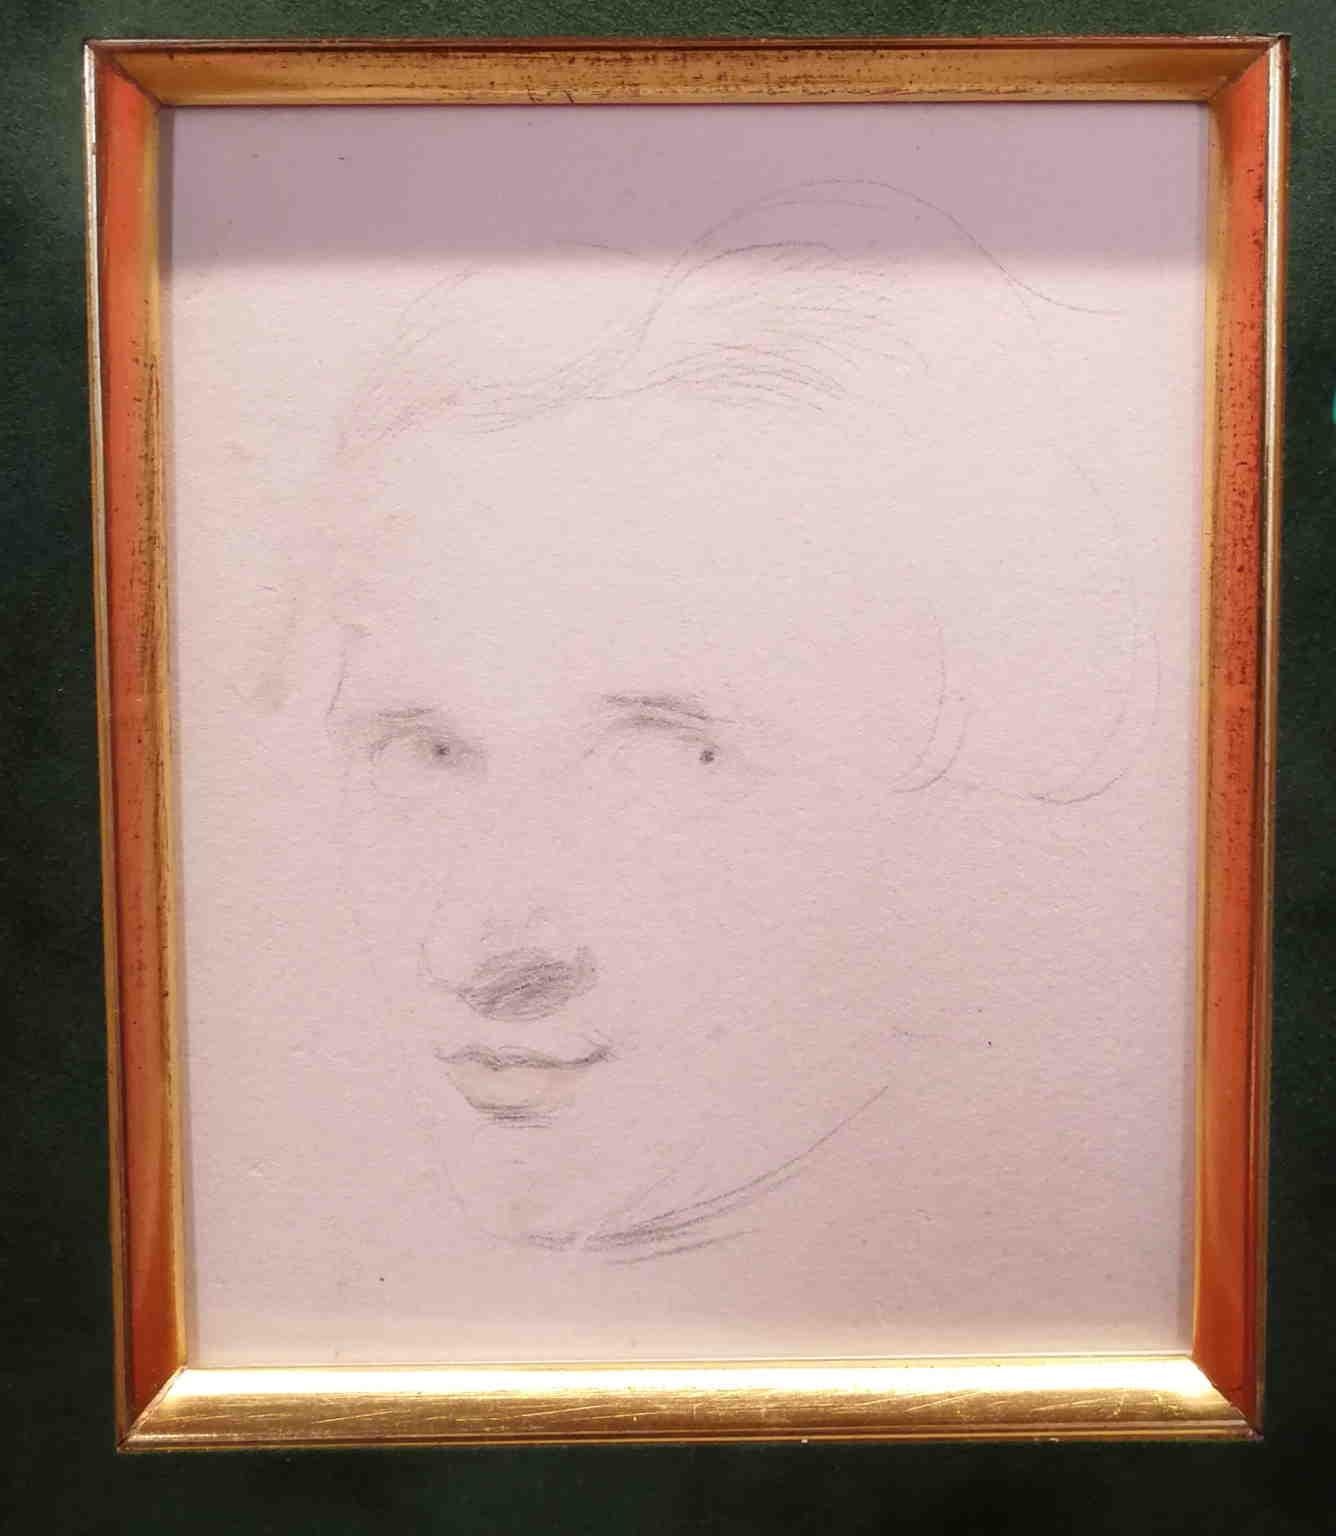 This small sketch, pencil on paper, can be attributed to Sir Thomas Lawrence, as also reported in the label on the frame (Sir Thomas Lawrence Painter of the Royal Academy).

Due to resemblances with his physiognomy, we can suppose it's a